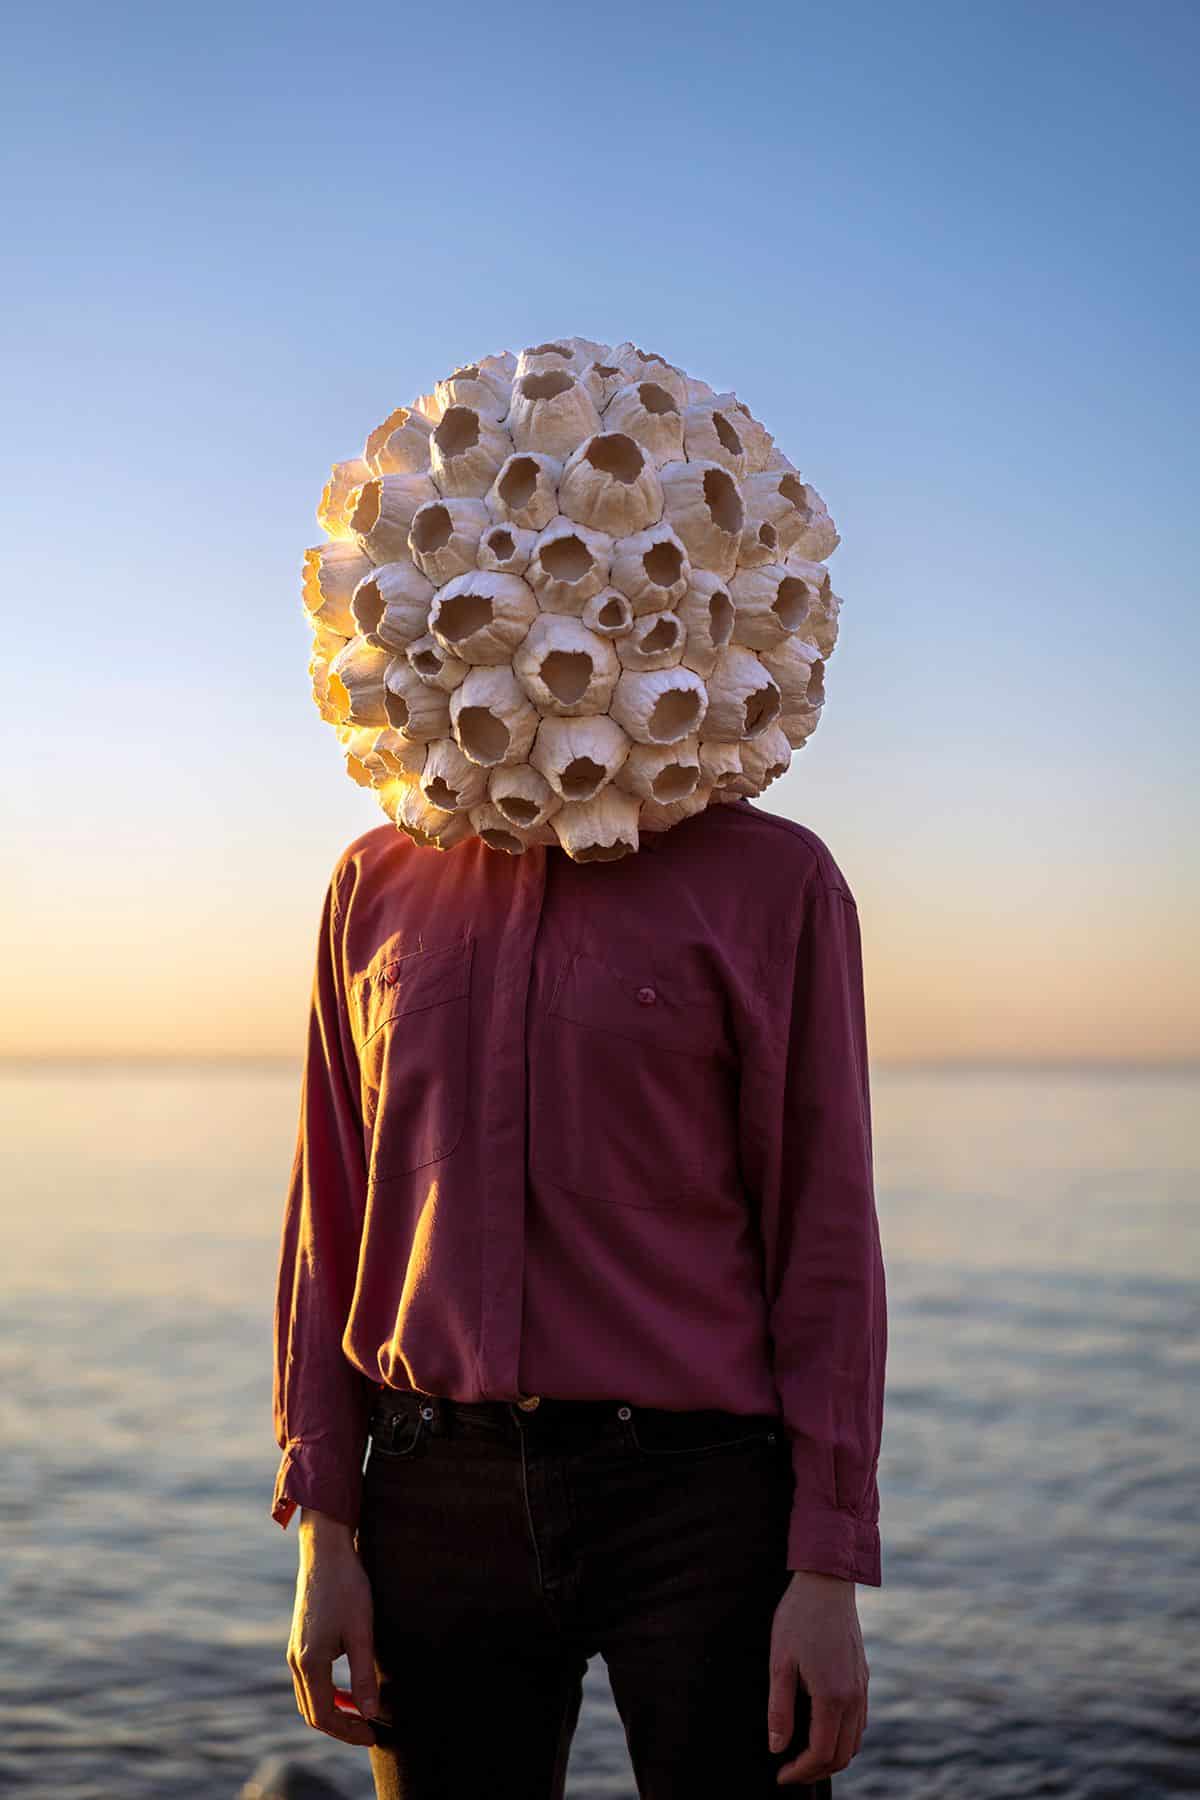 A person wearing a burgundy shirt and black jeans standing on the edge of water wearing a sphere of barnacles over their head